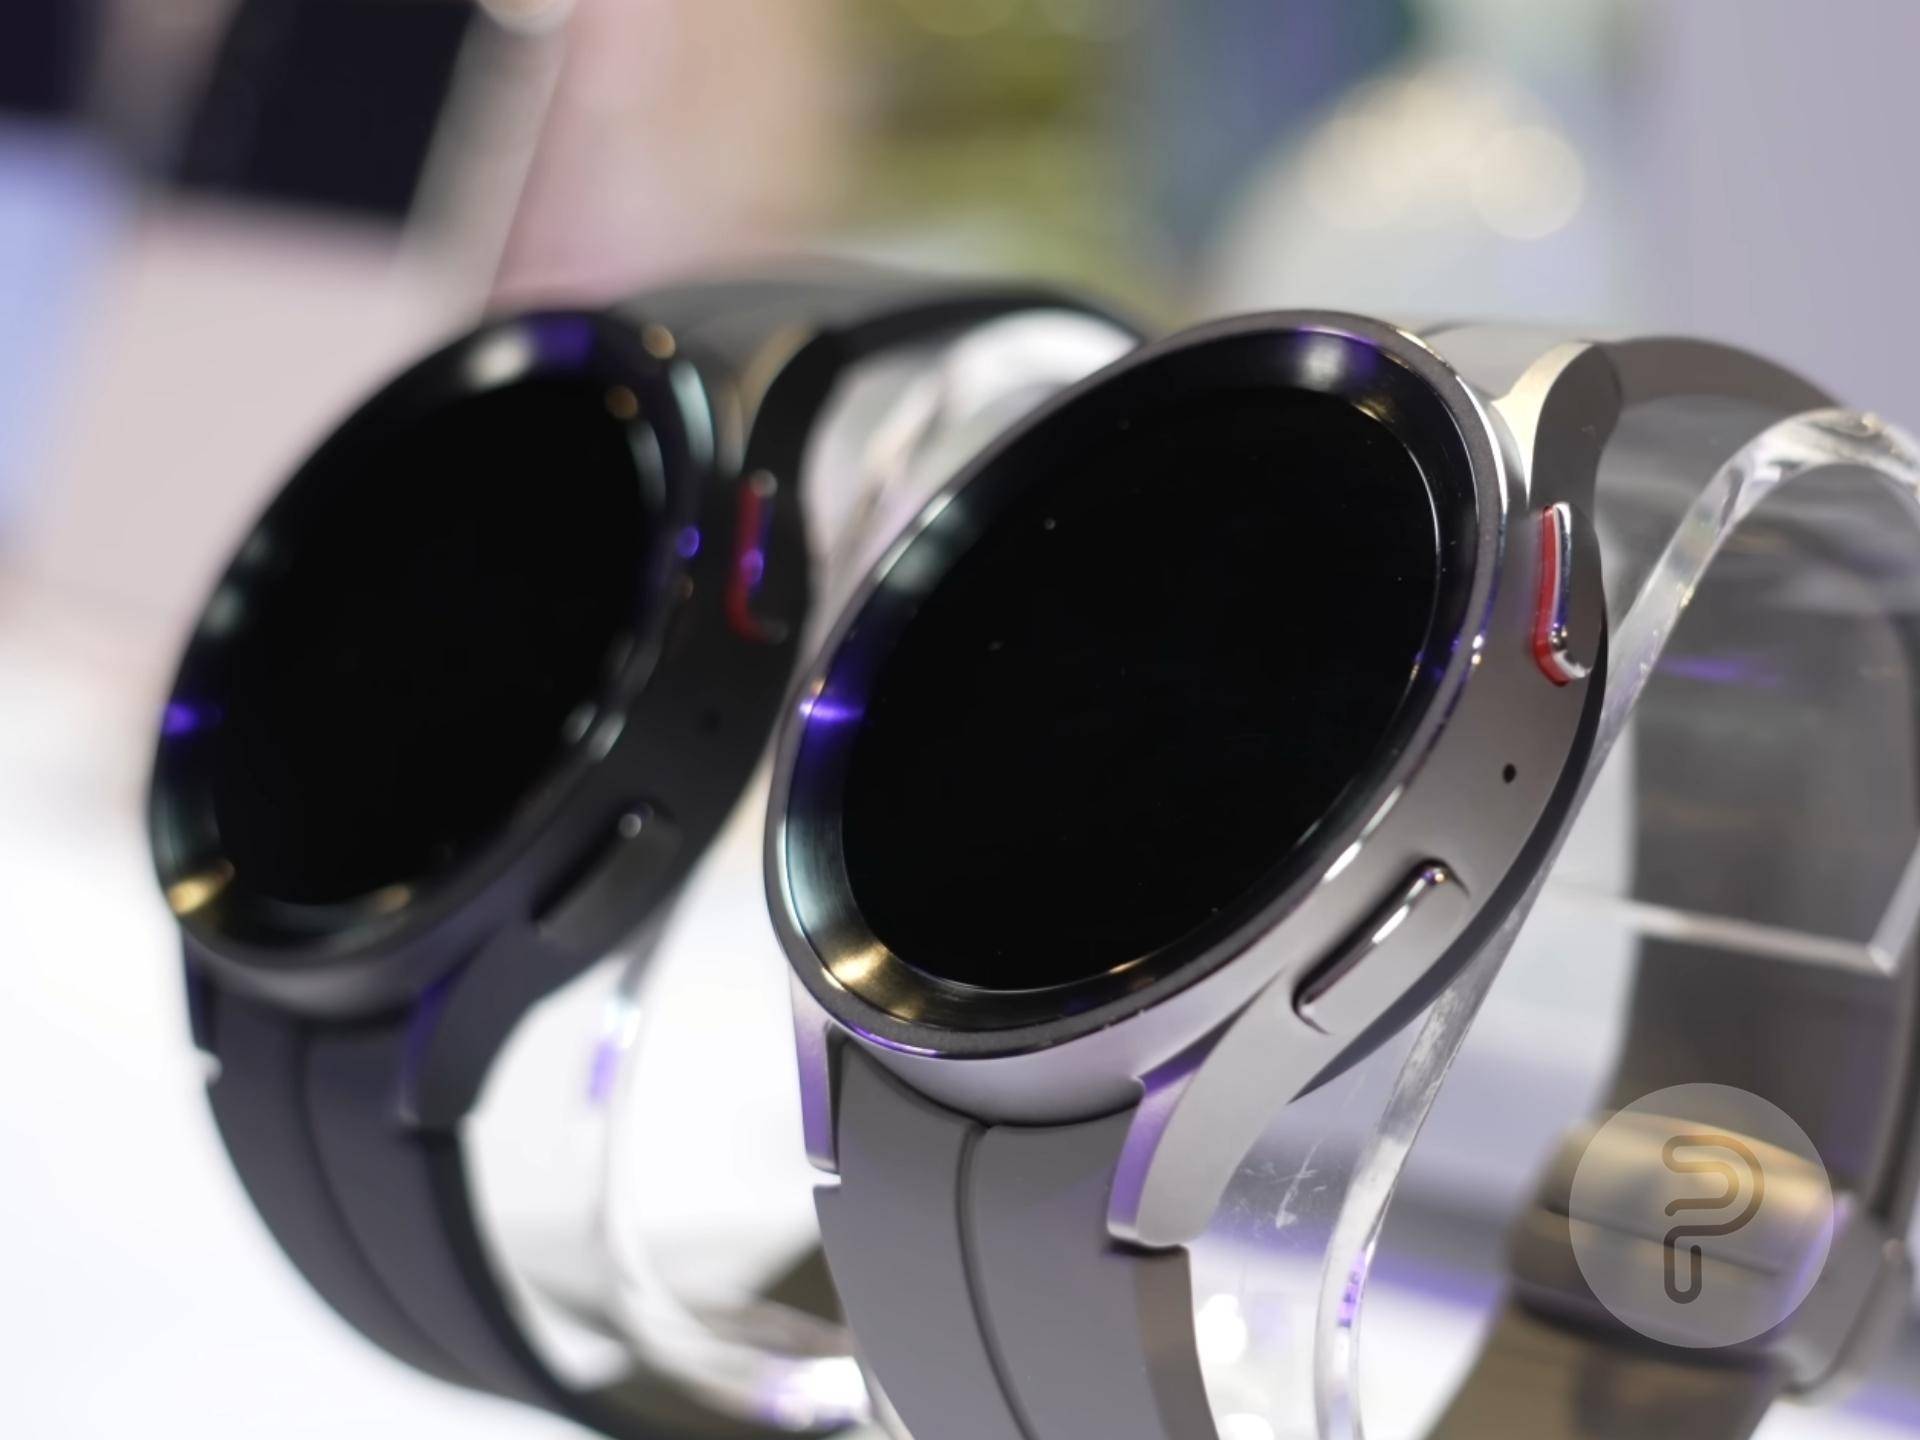 Galaxy Watch 5 Pro in Gray Titanium with Black Titanium variant in the background; both placed on a watch holder